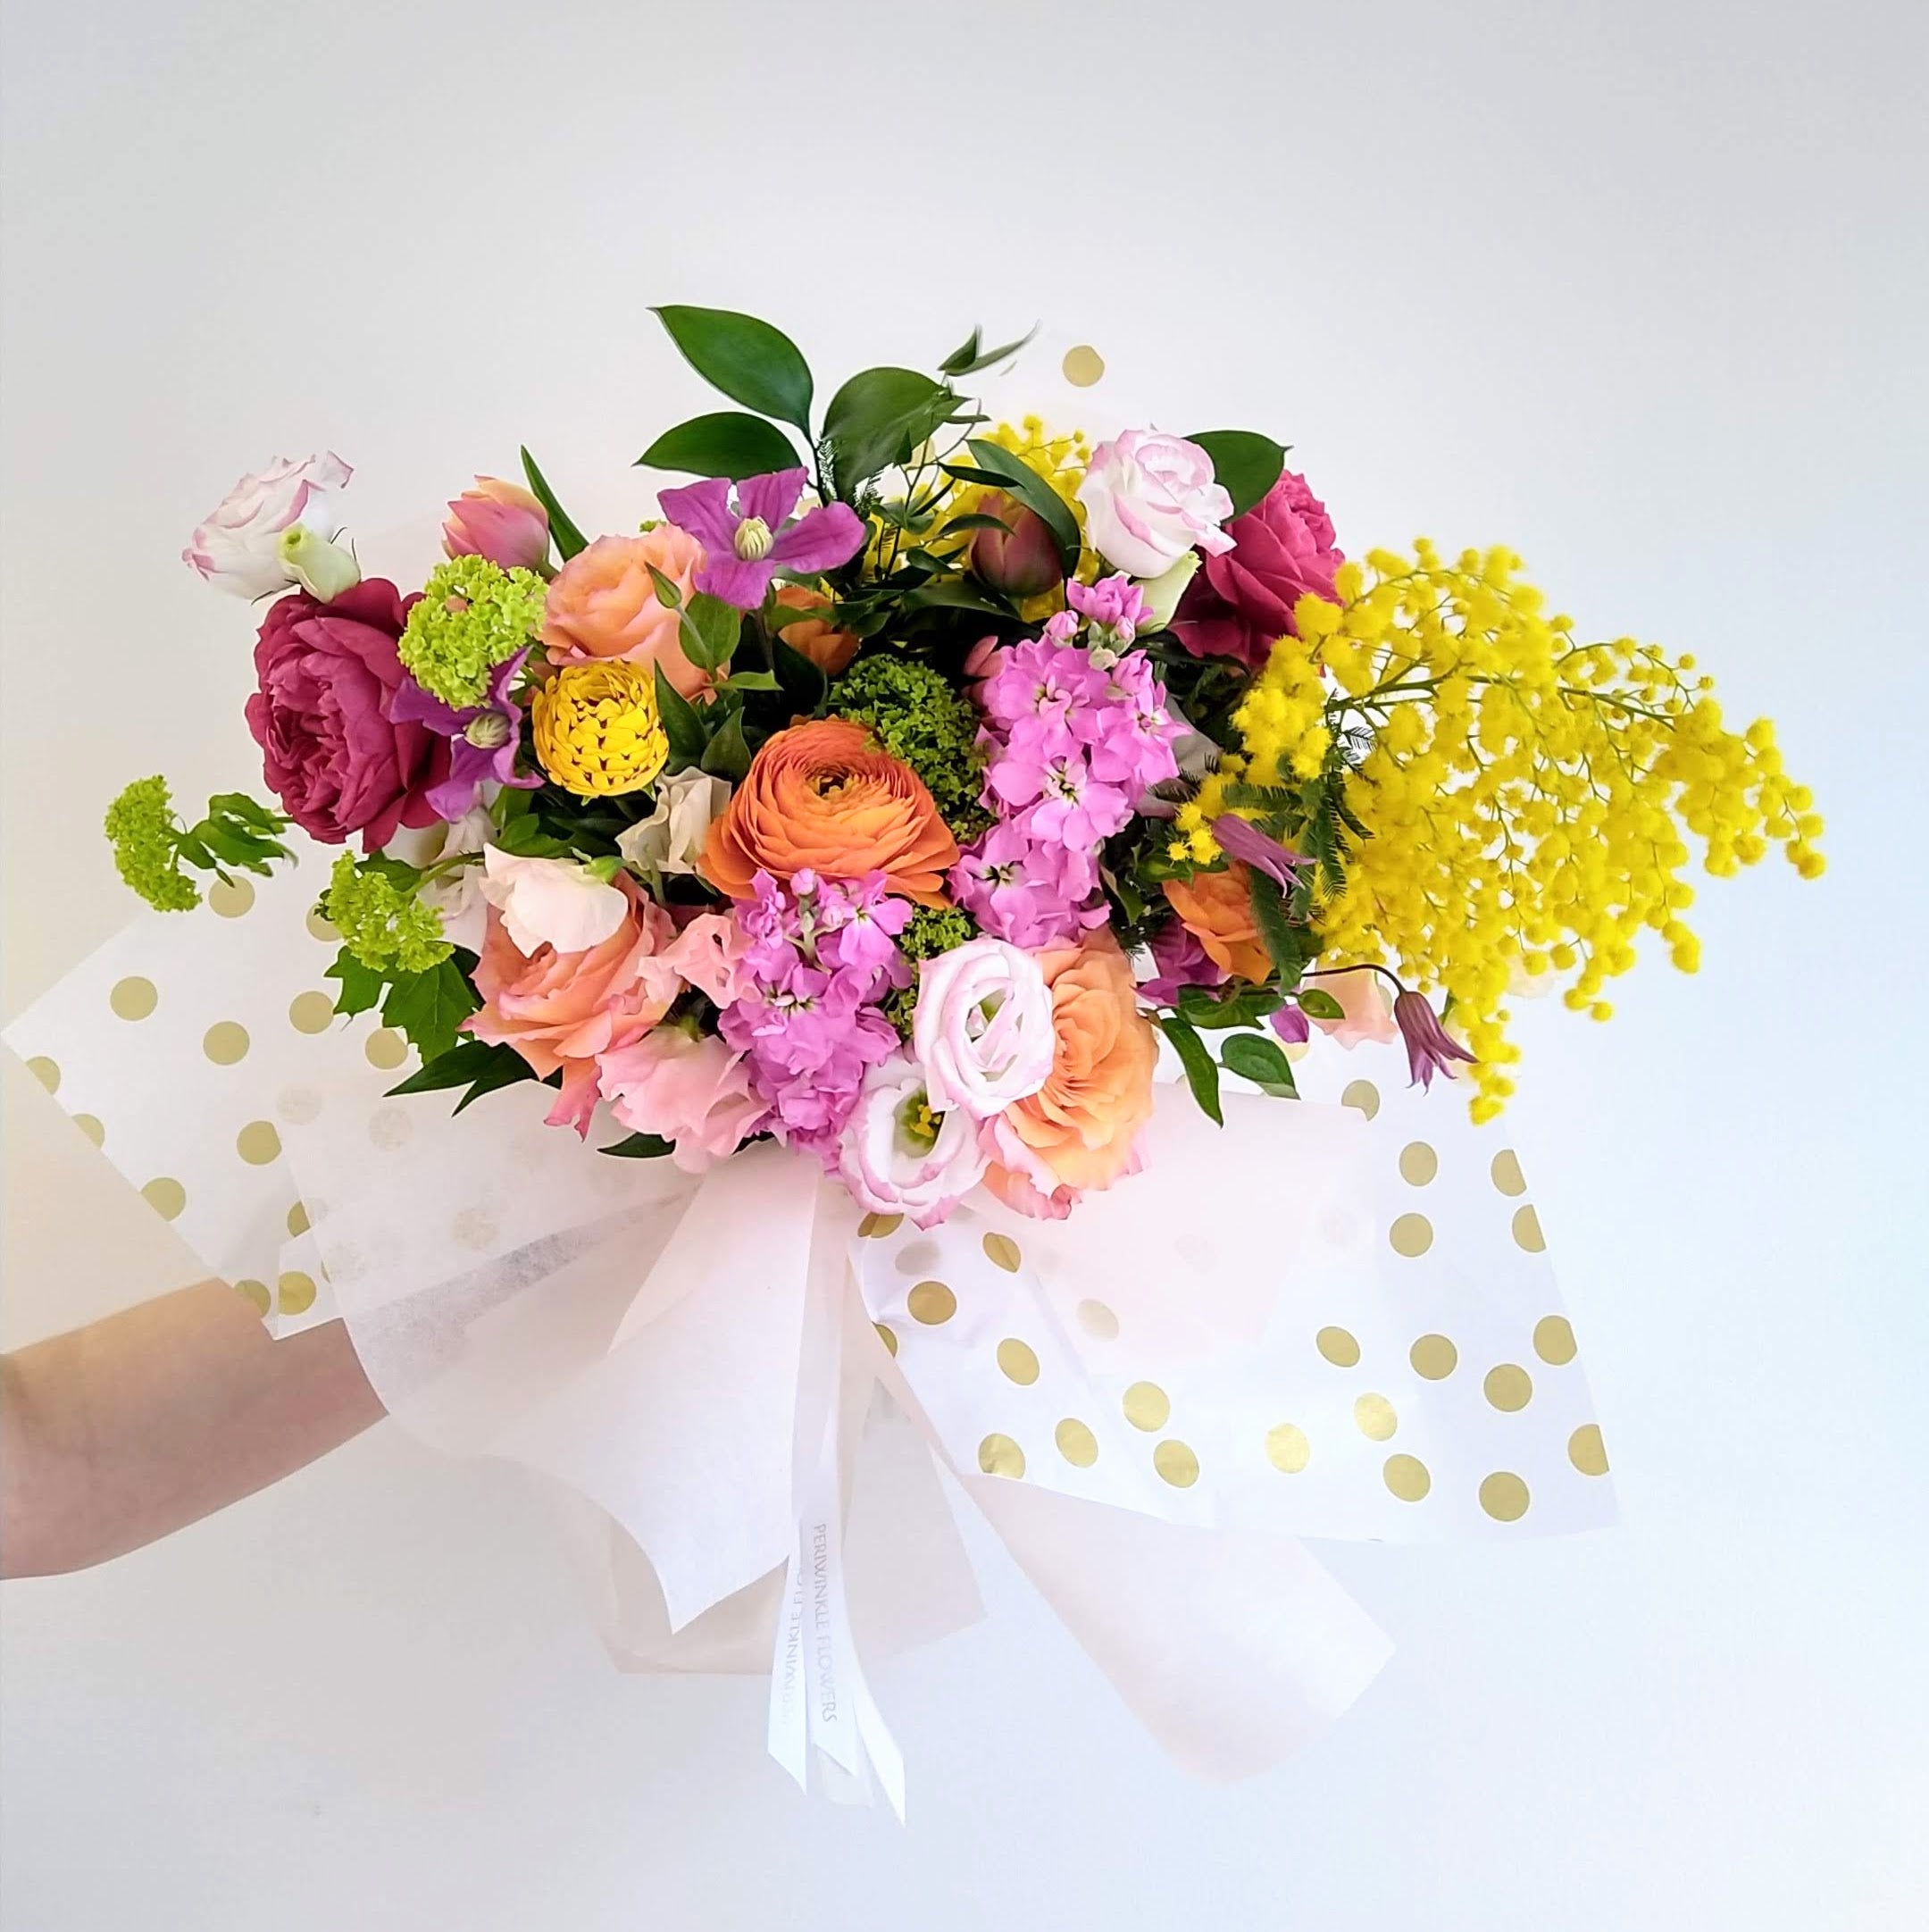 Lulu bouquet-Colourful or Pastel (4 sizes available)